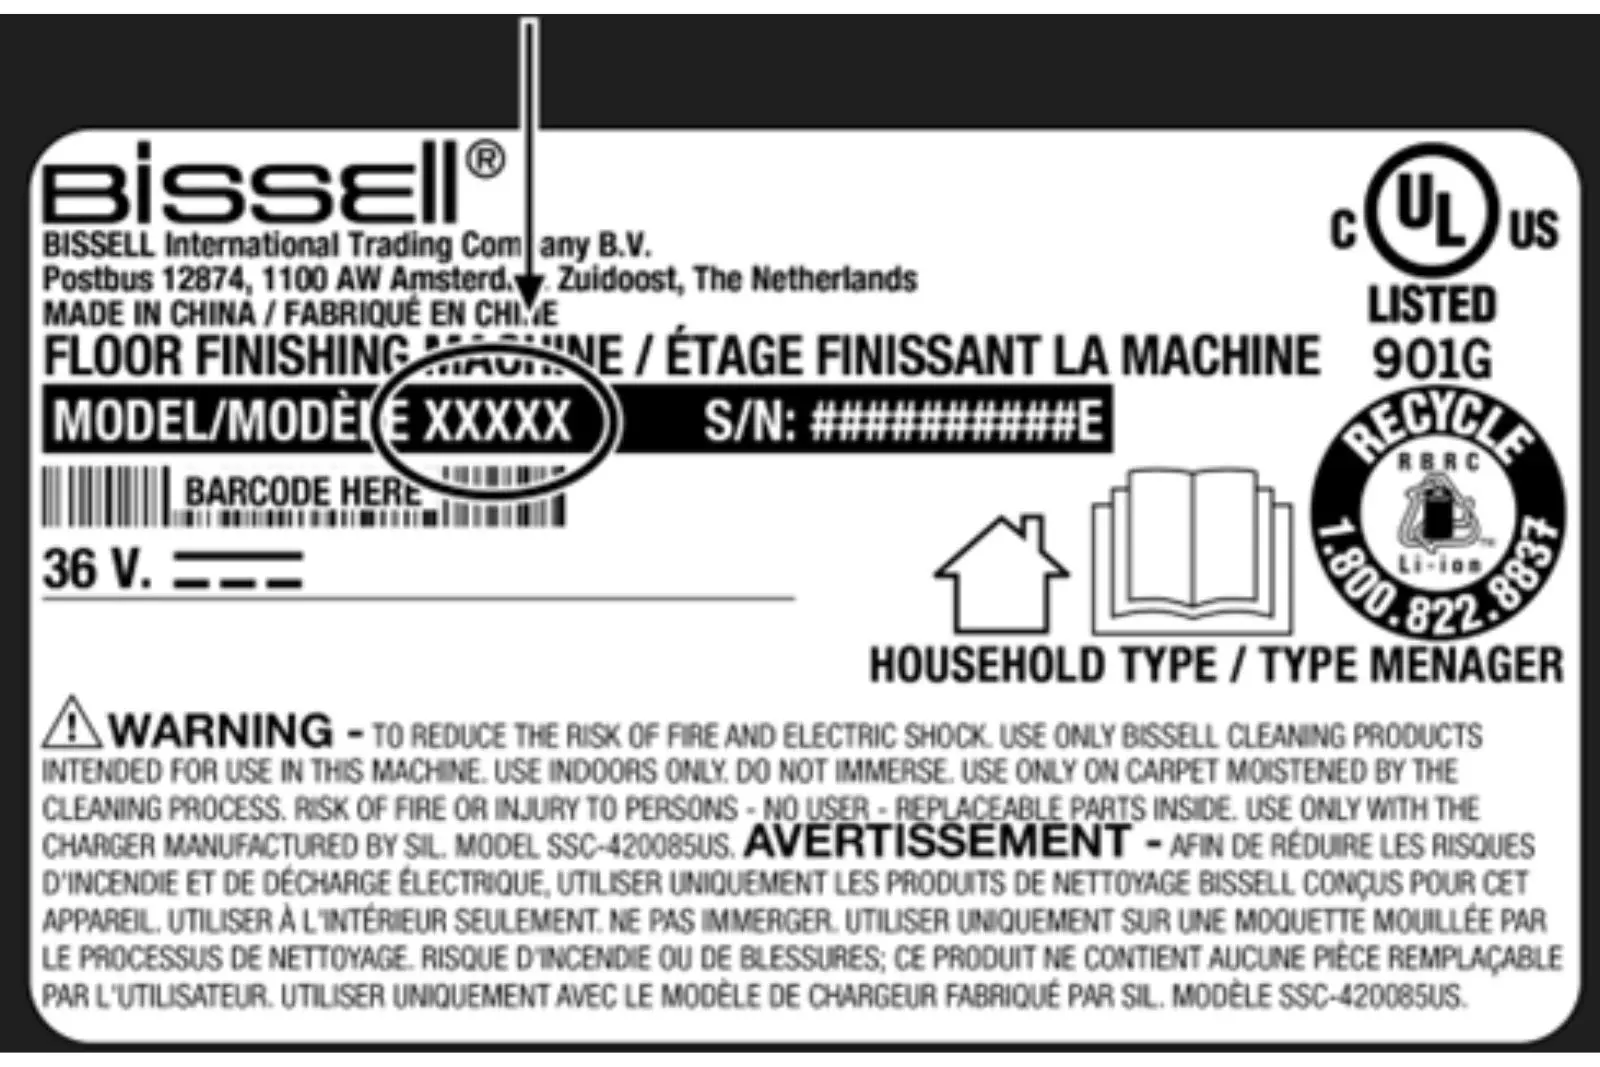 Bissell Recalls Wet-Dry Vacuums Due to Possible Fire Risk